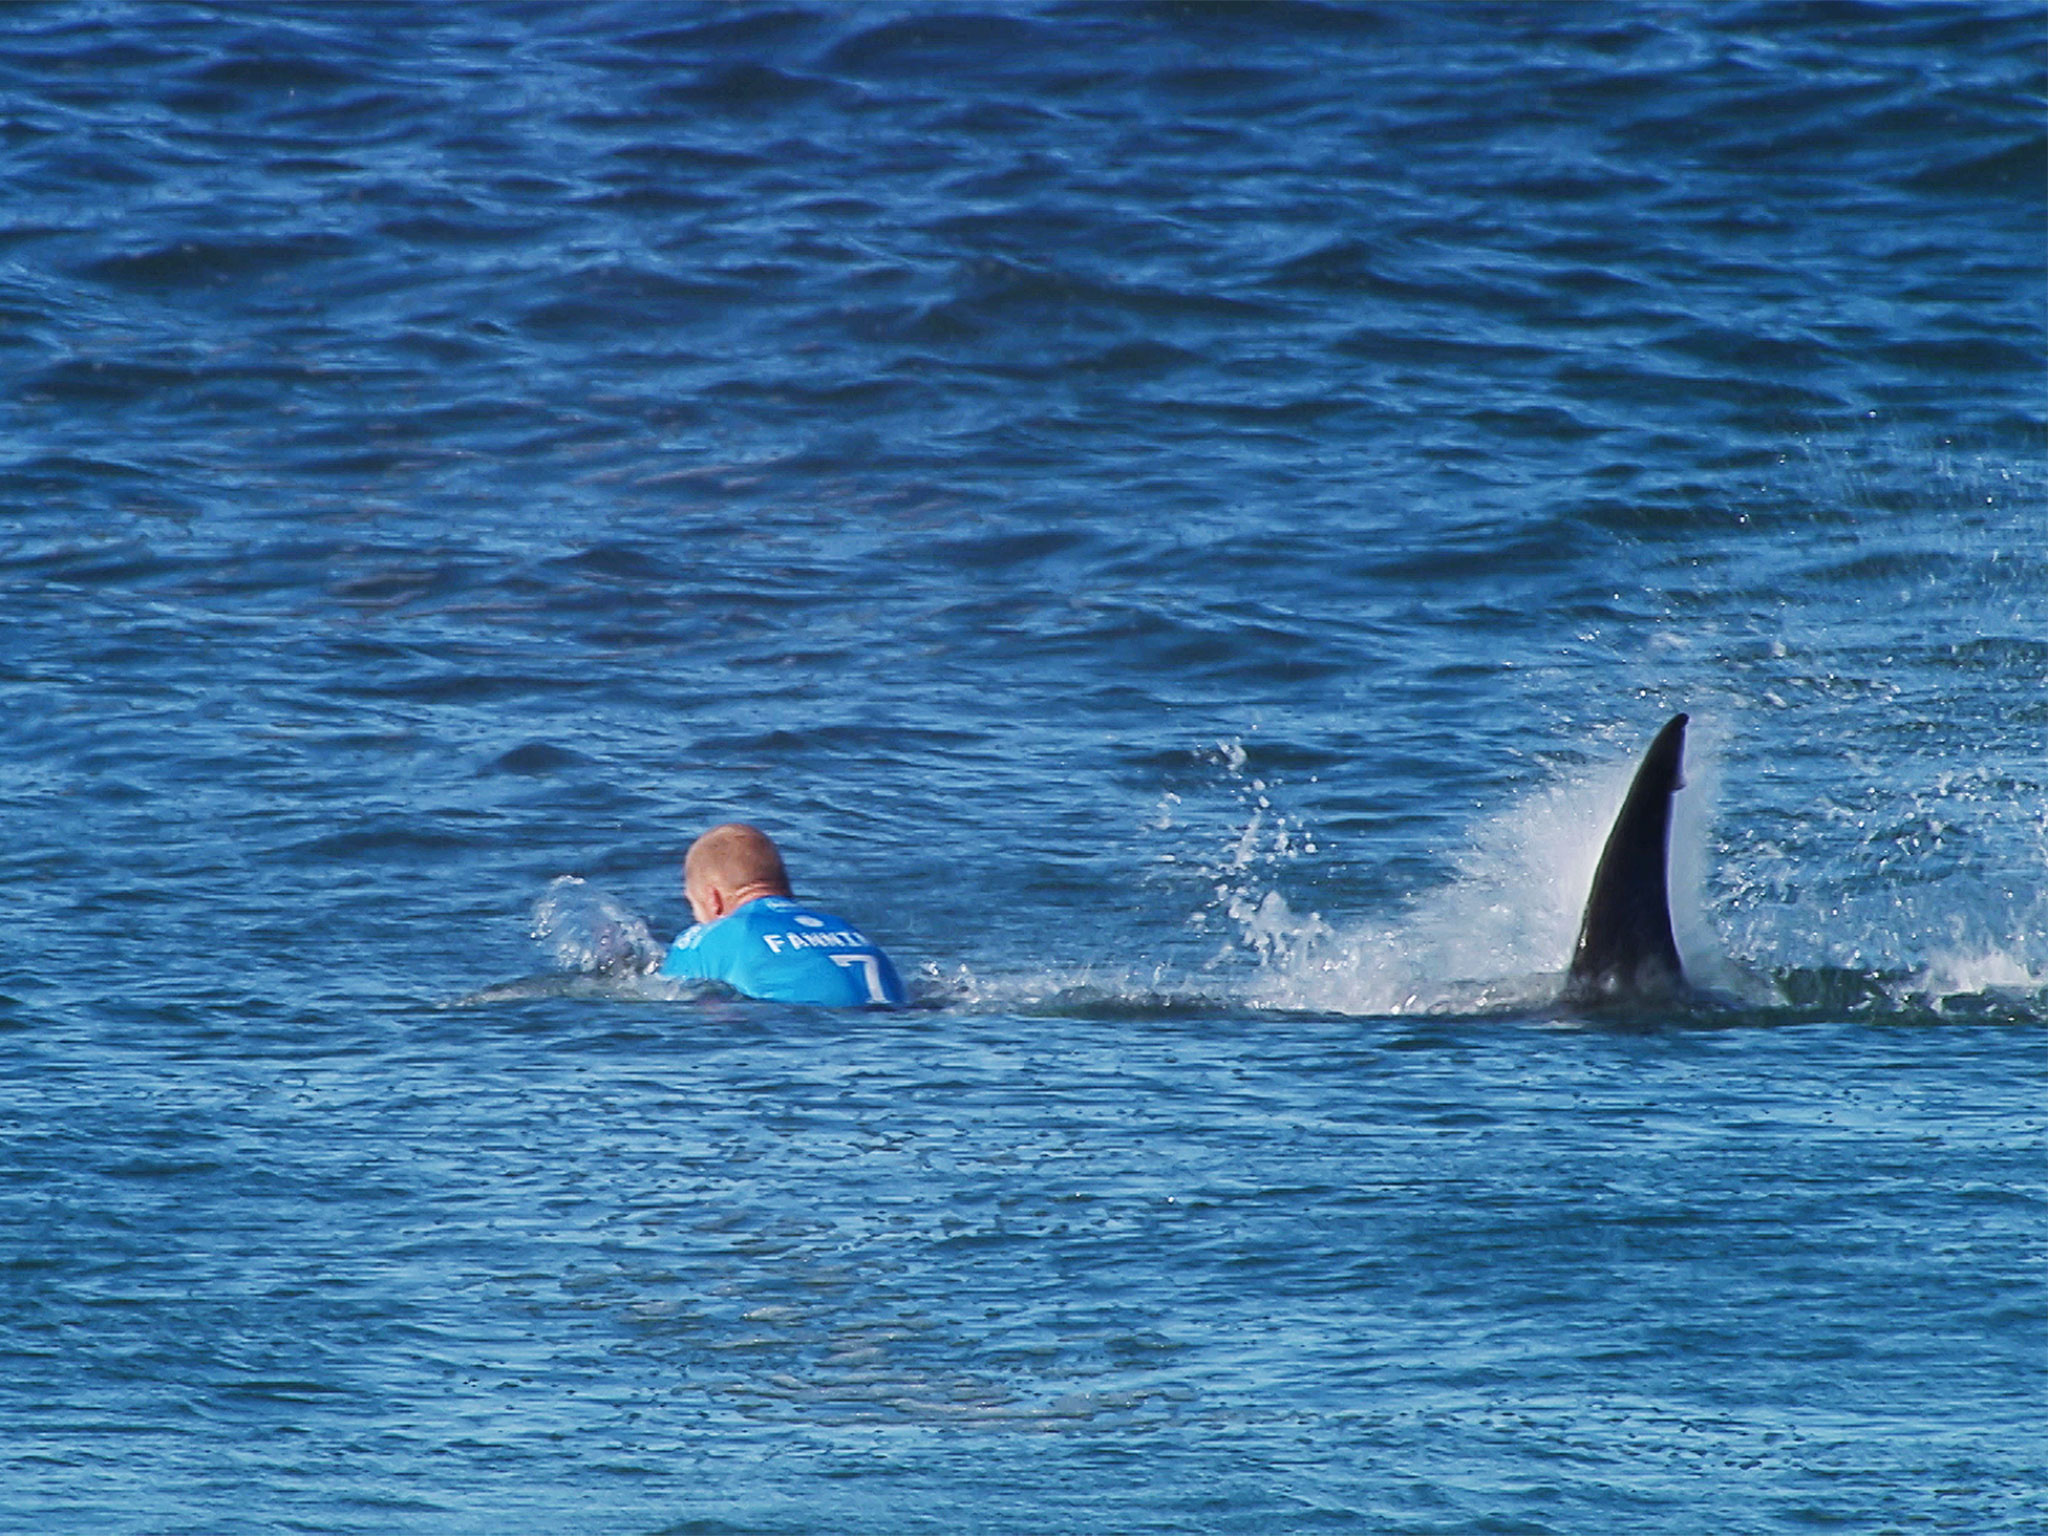 Surfer Attacked by Shark 'Did Everything Right'